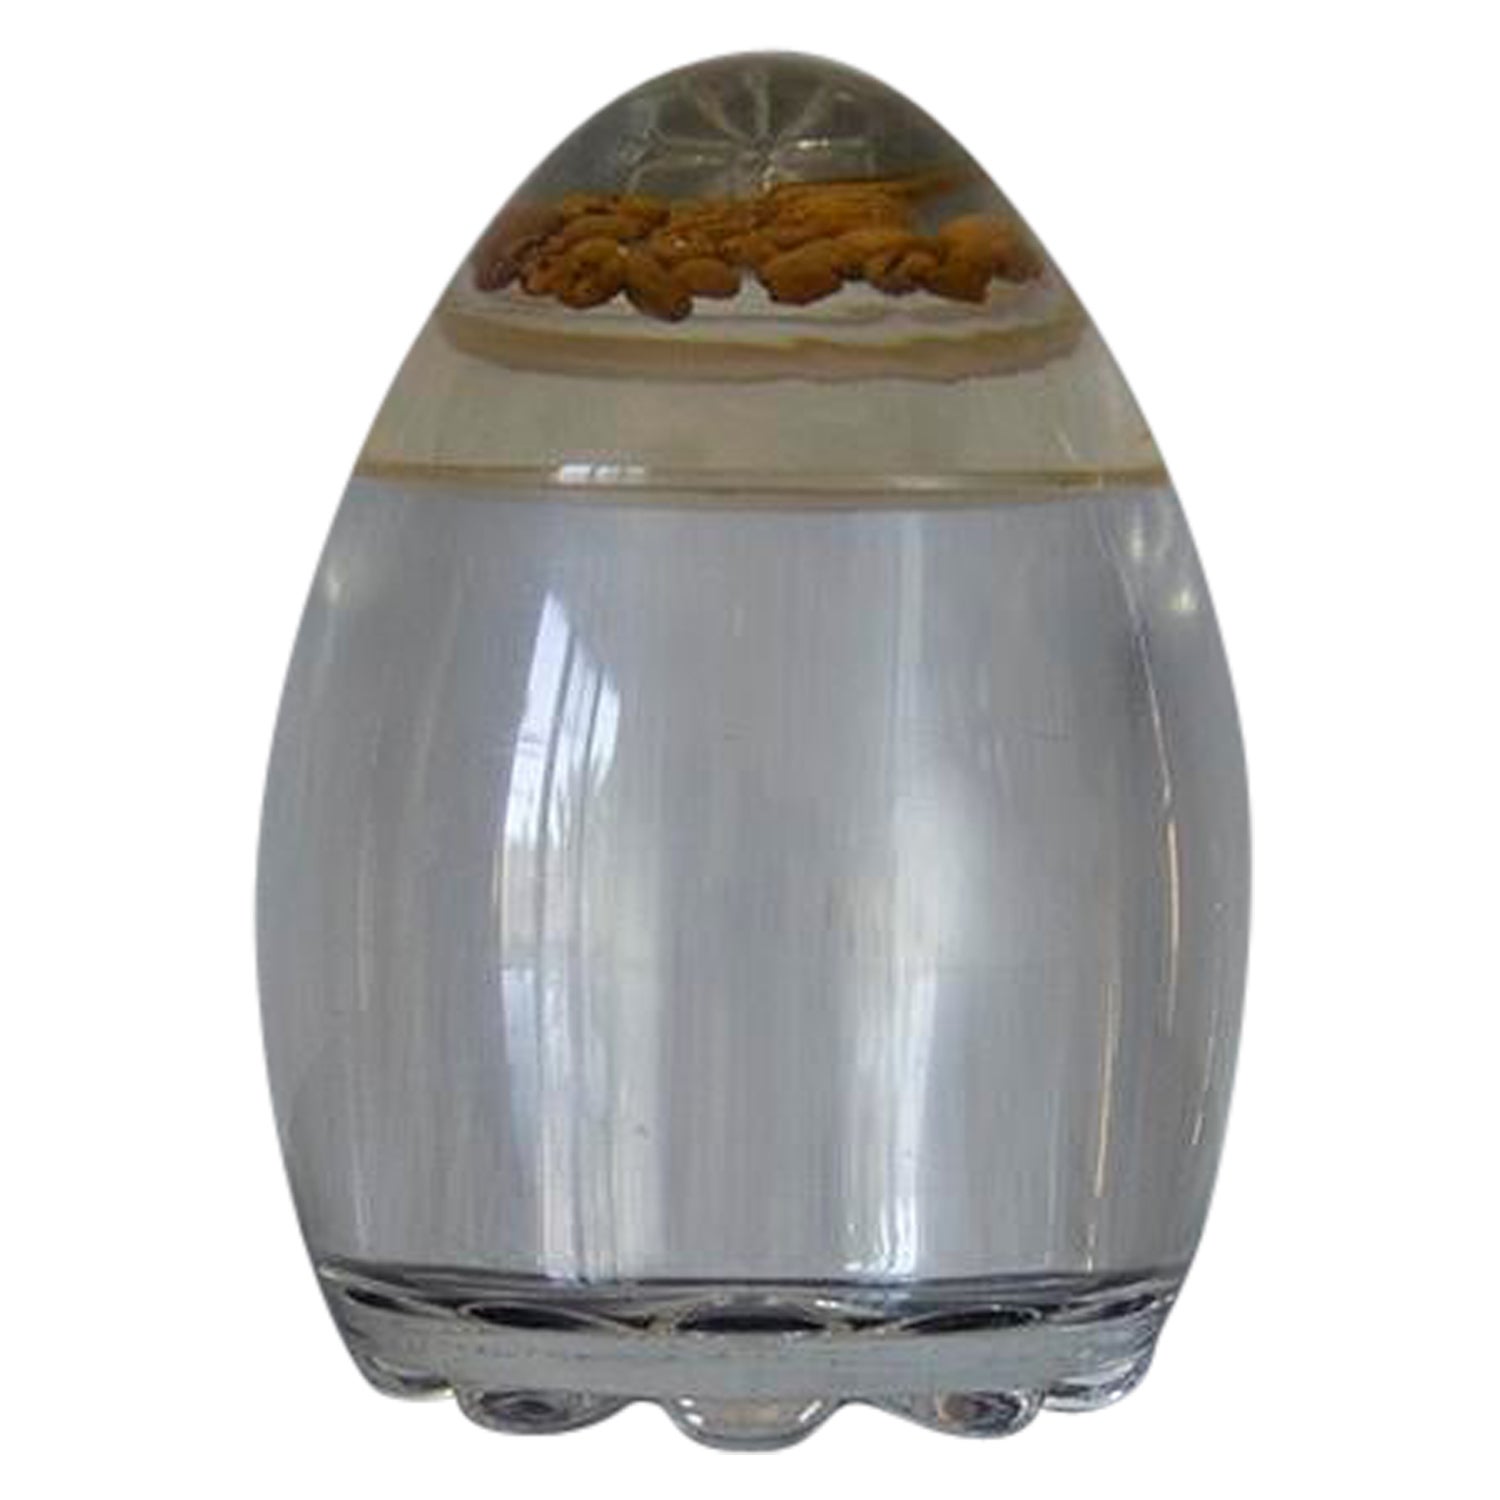 1970’s Mid Century Egg Shape Coffee Storage Container With Coffee Beans Cover For Sale